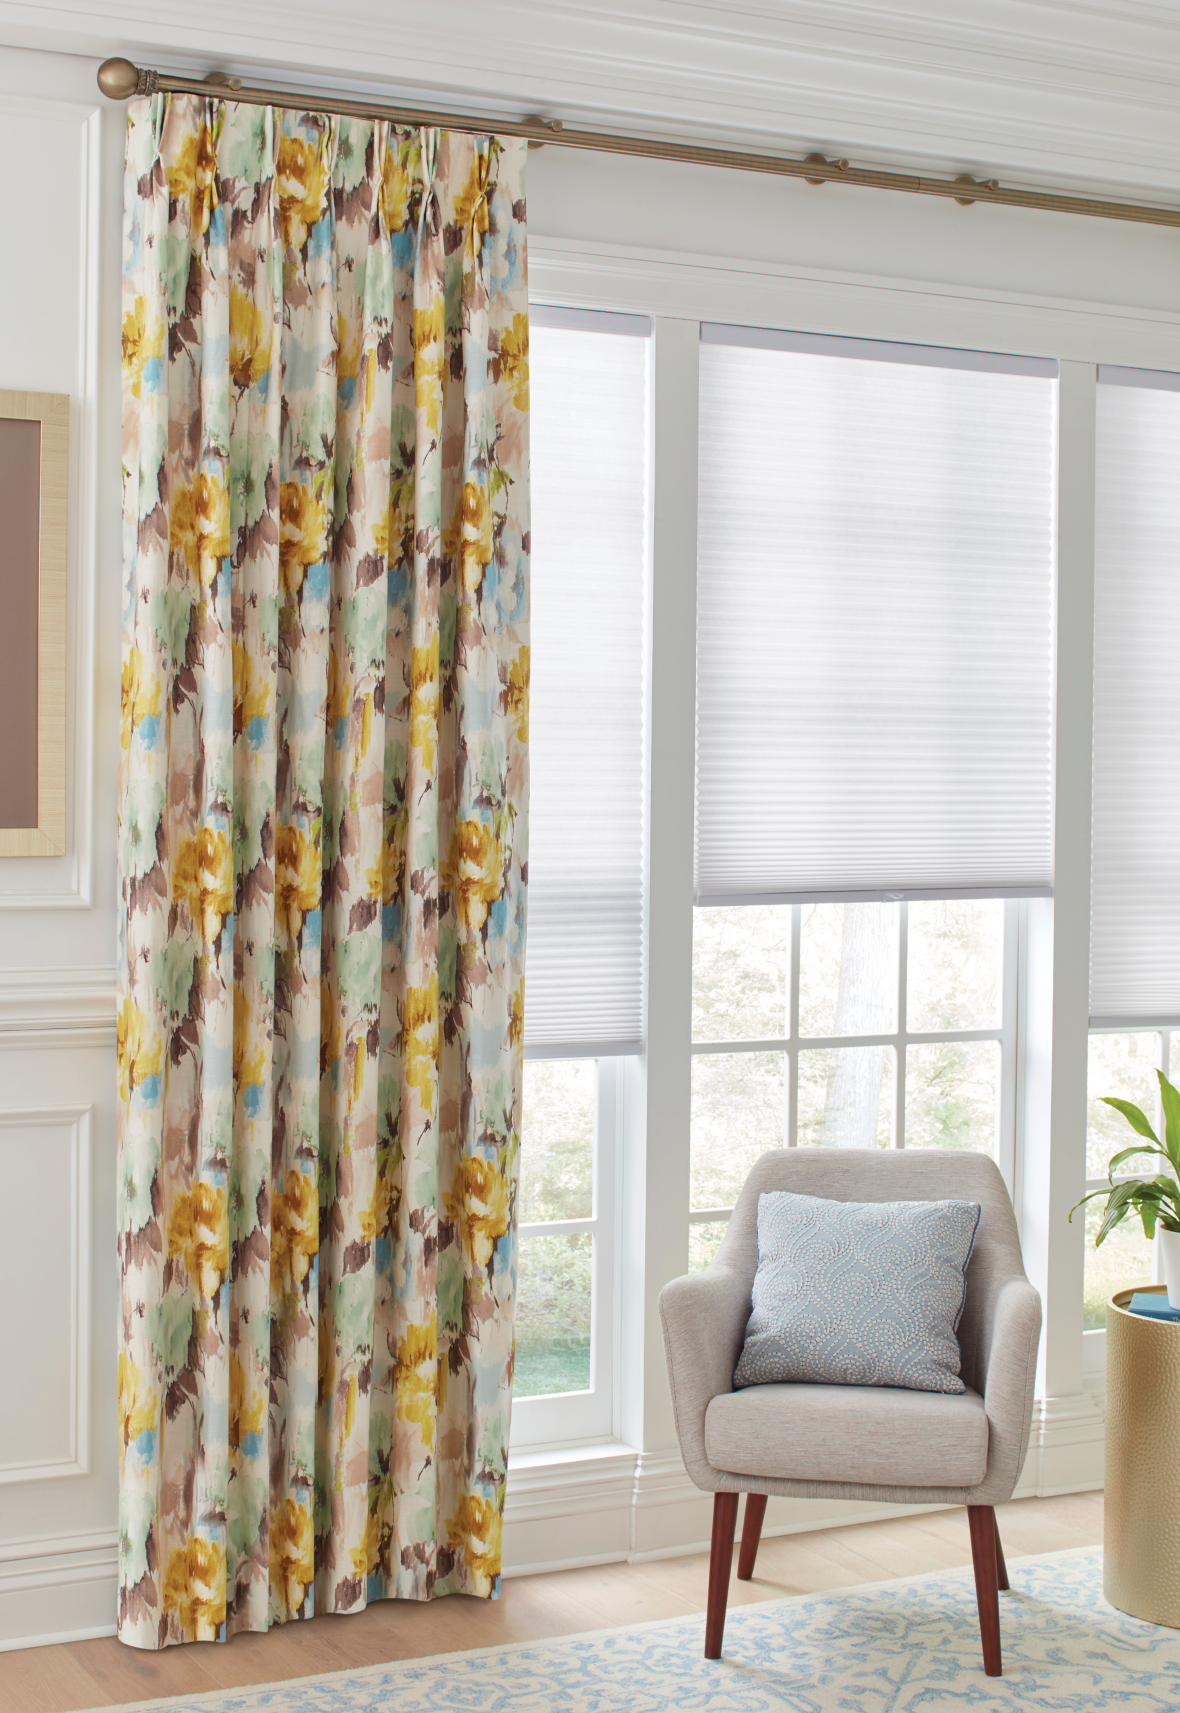 Elements® Express Cellular Shades paired with AriA® Metal Hardware